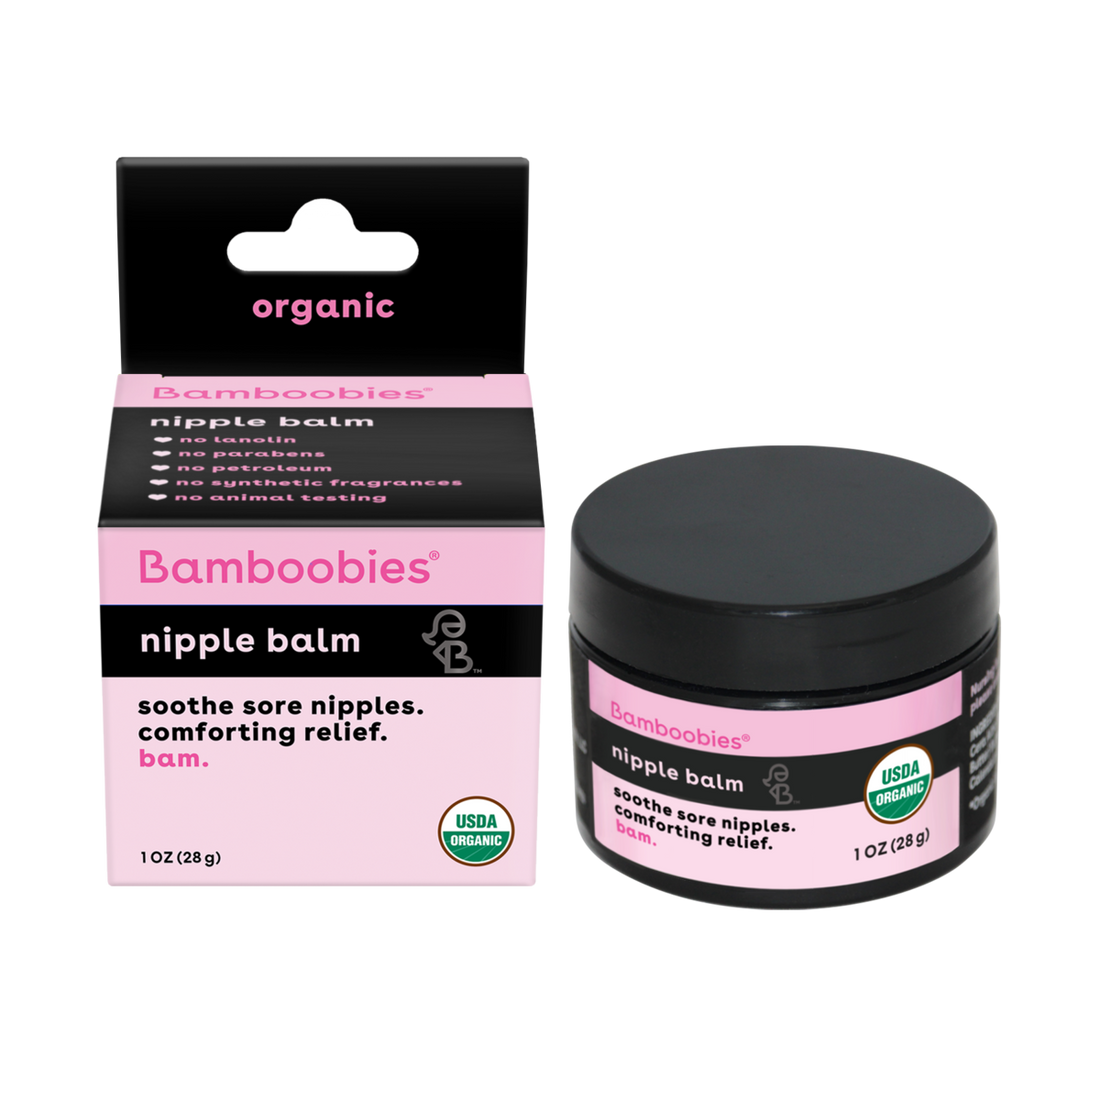 Bamboobies organic nipple balm (2 pack) – Apothecary Products